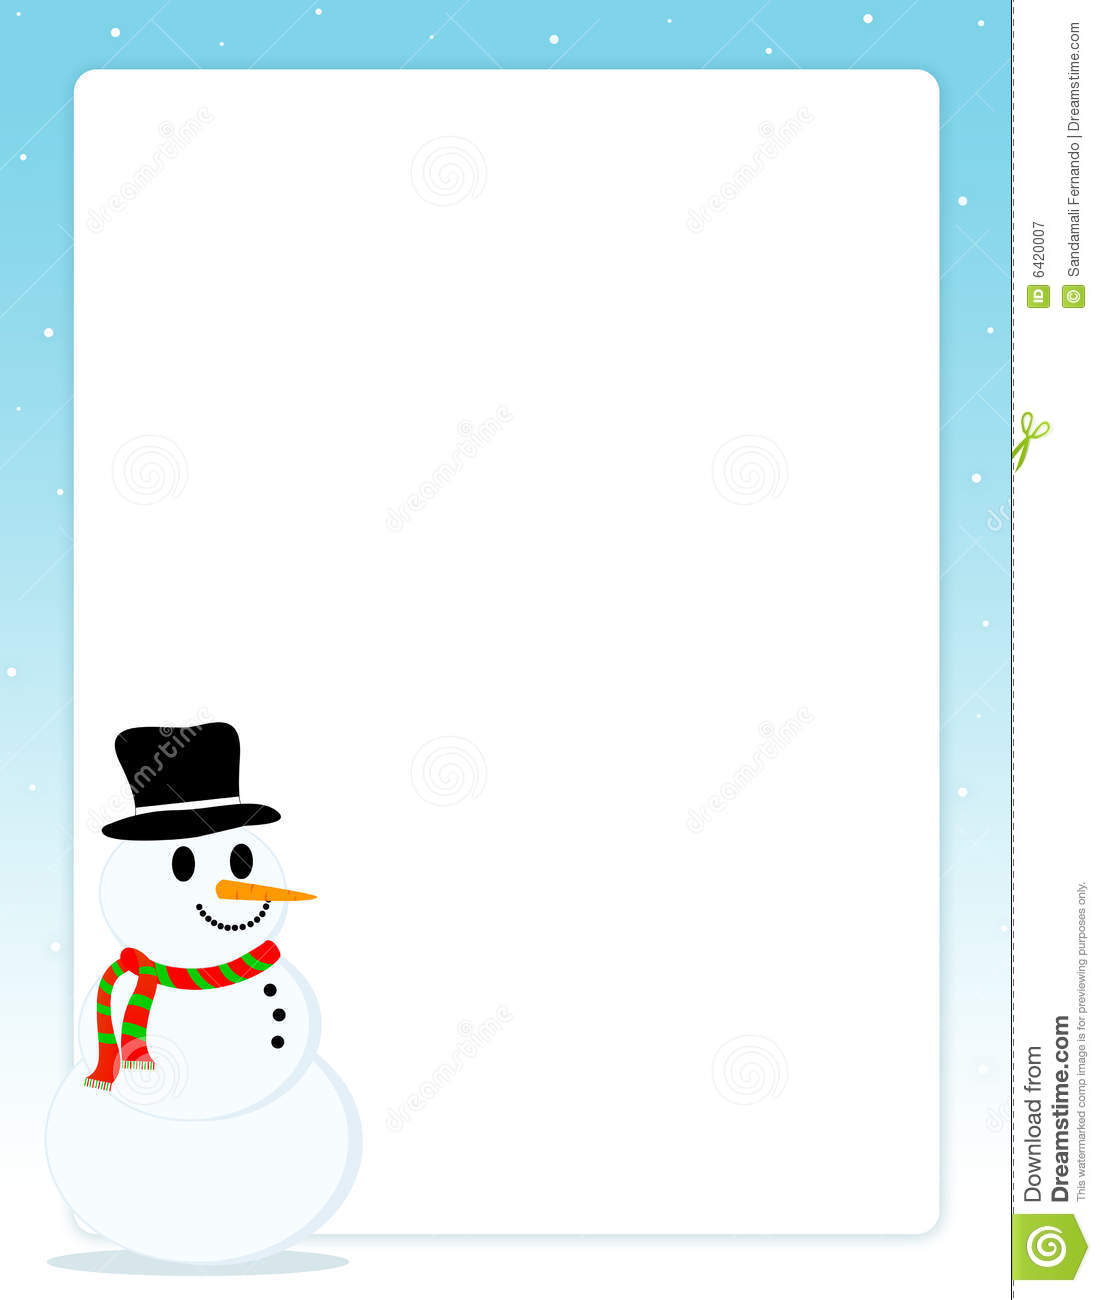 Christmas Border With Snowman Royalty Free Stock Photography   Image